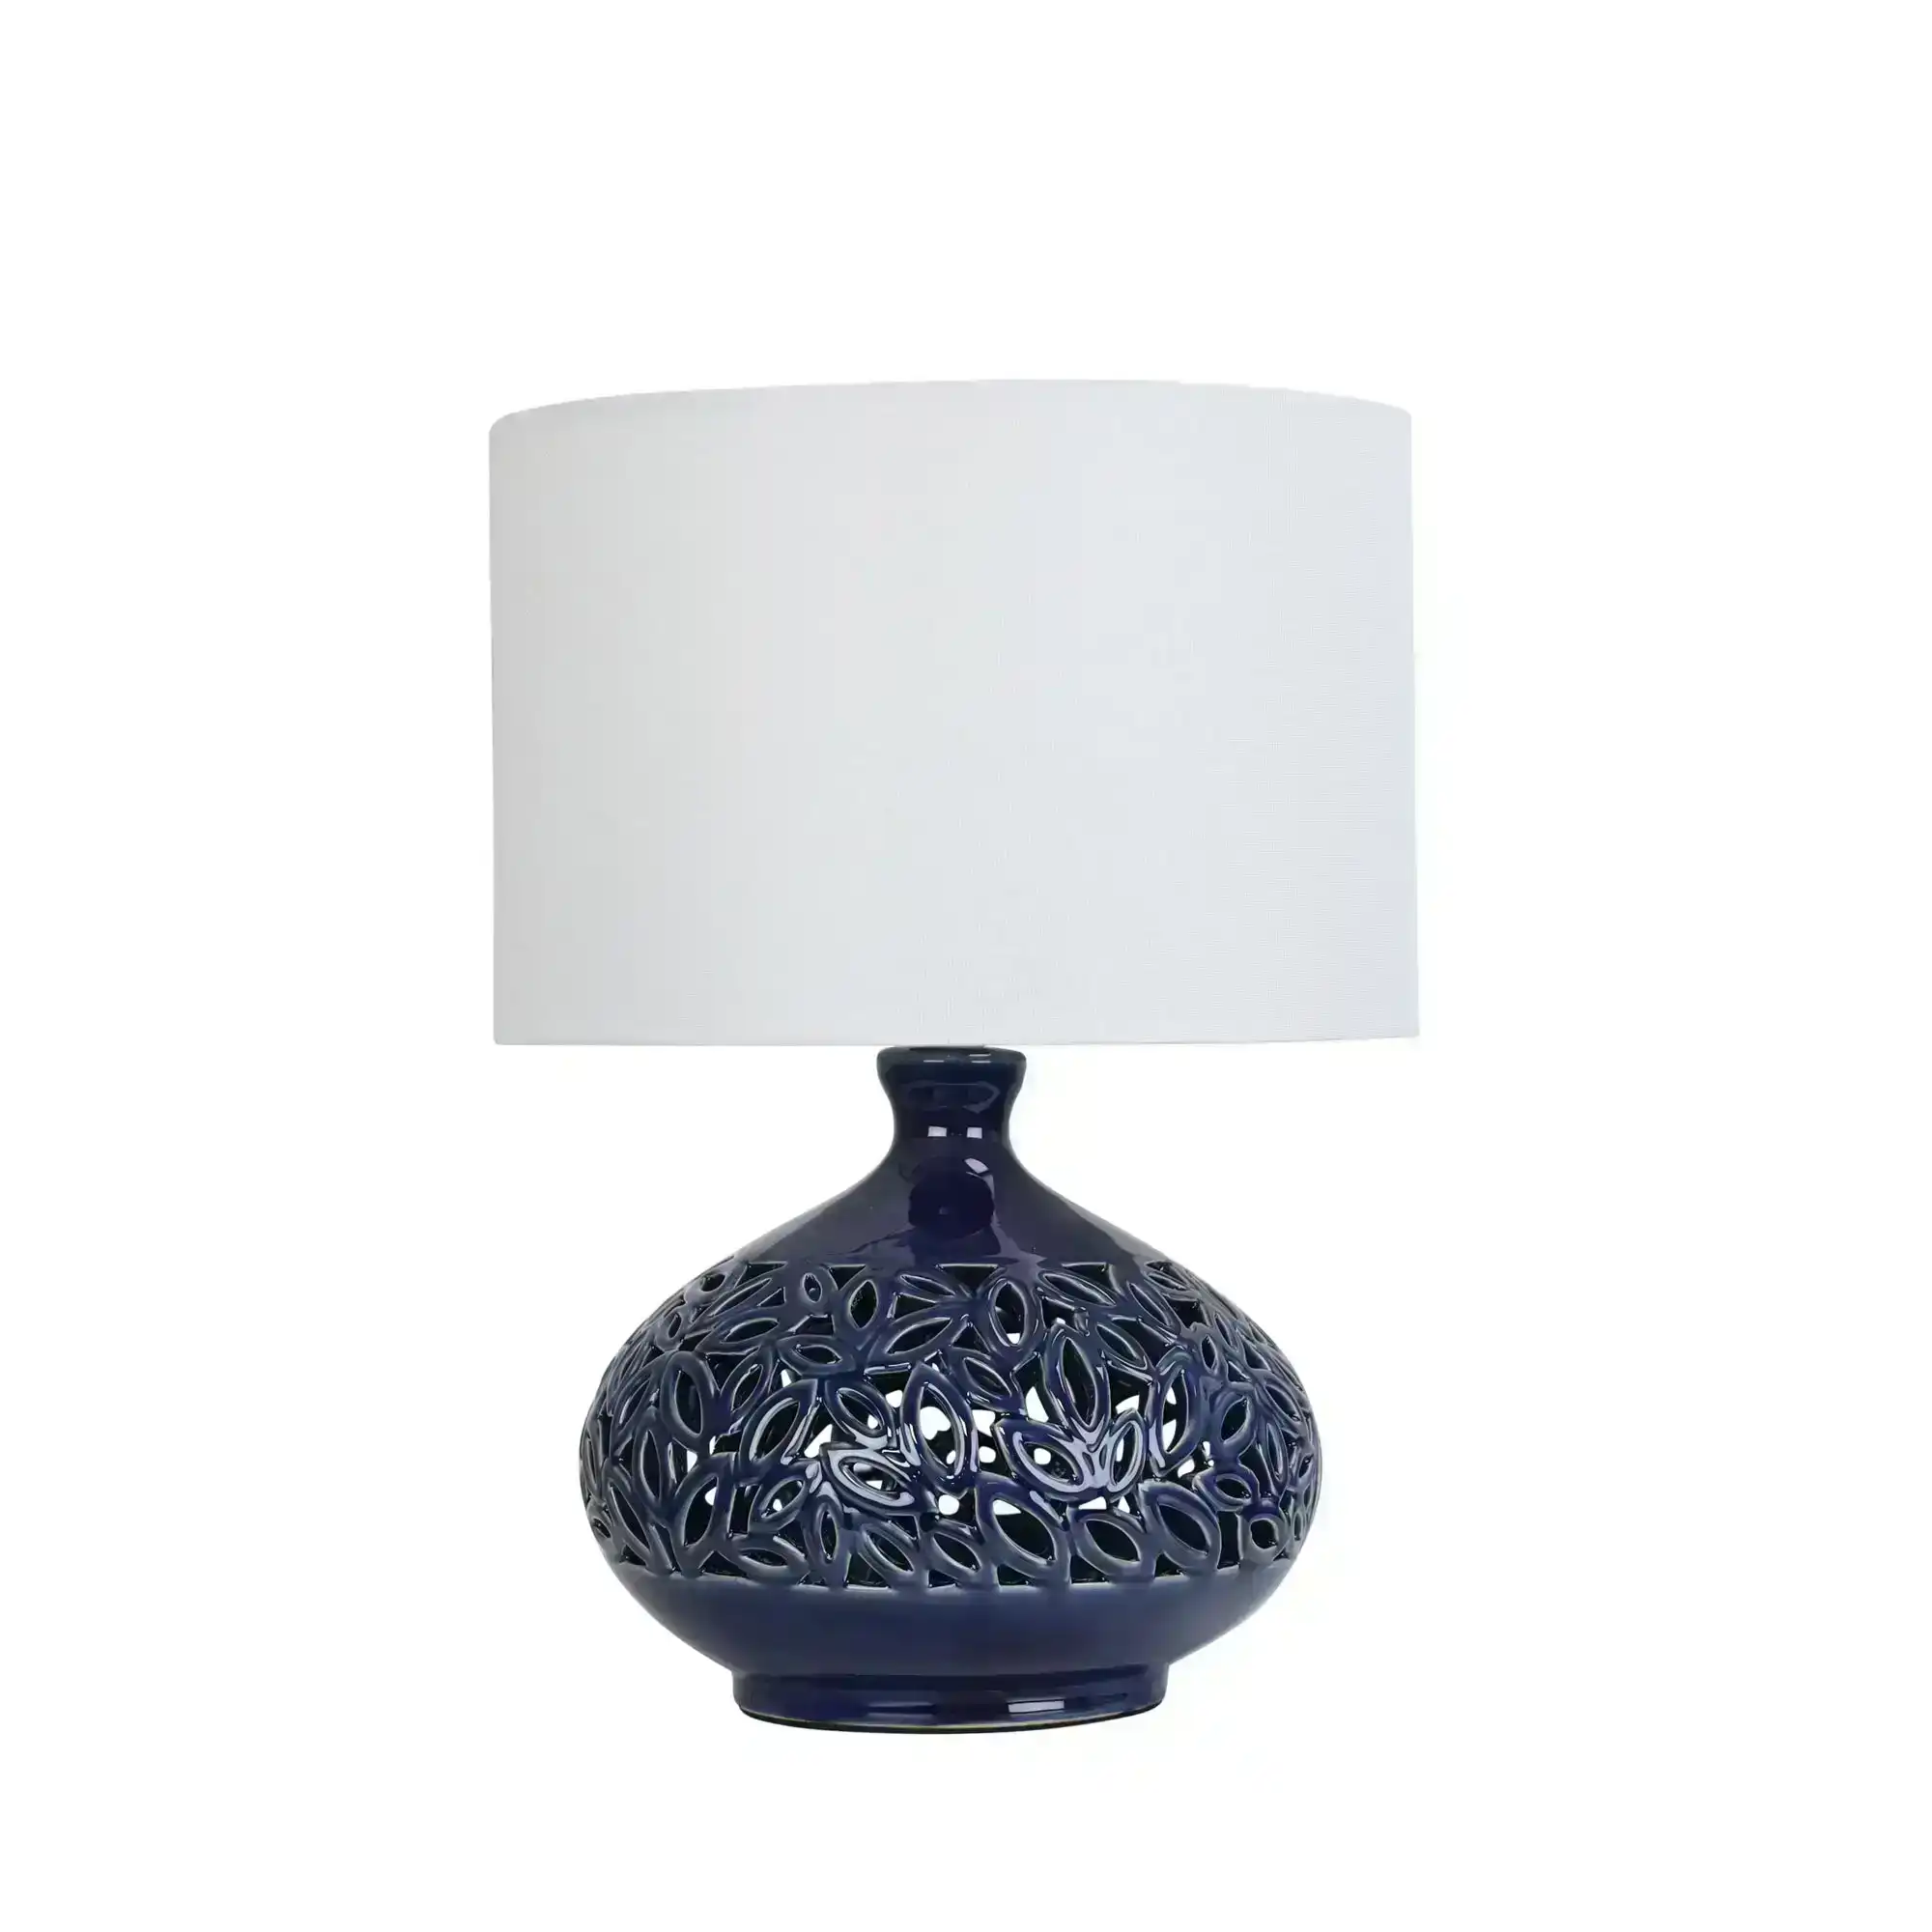 DOUGLAS Ceramic Table Lamp with Shade